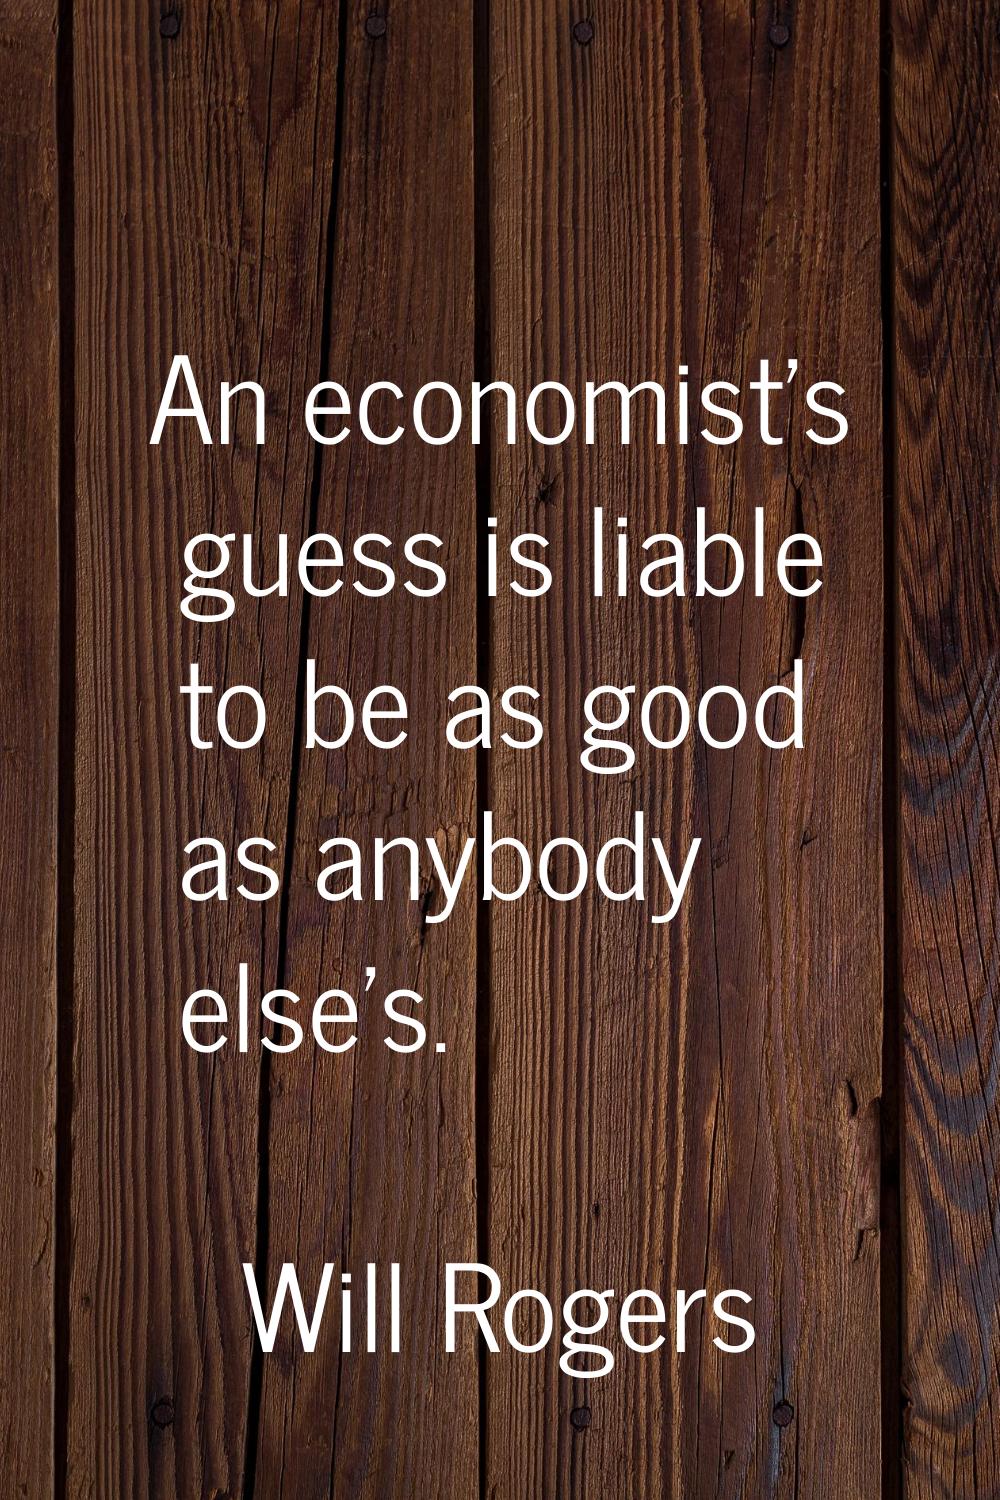 An economist's guess is liable to be as good as anybody else's.